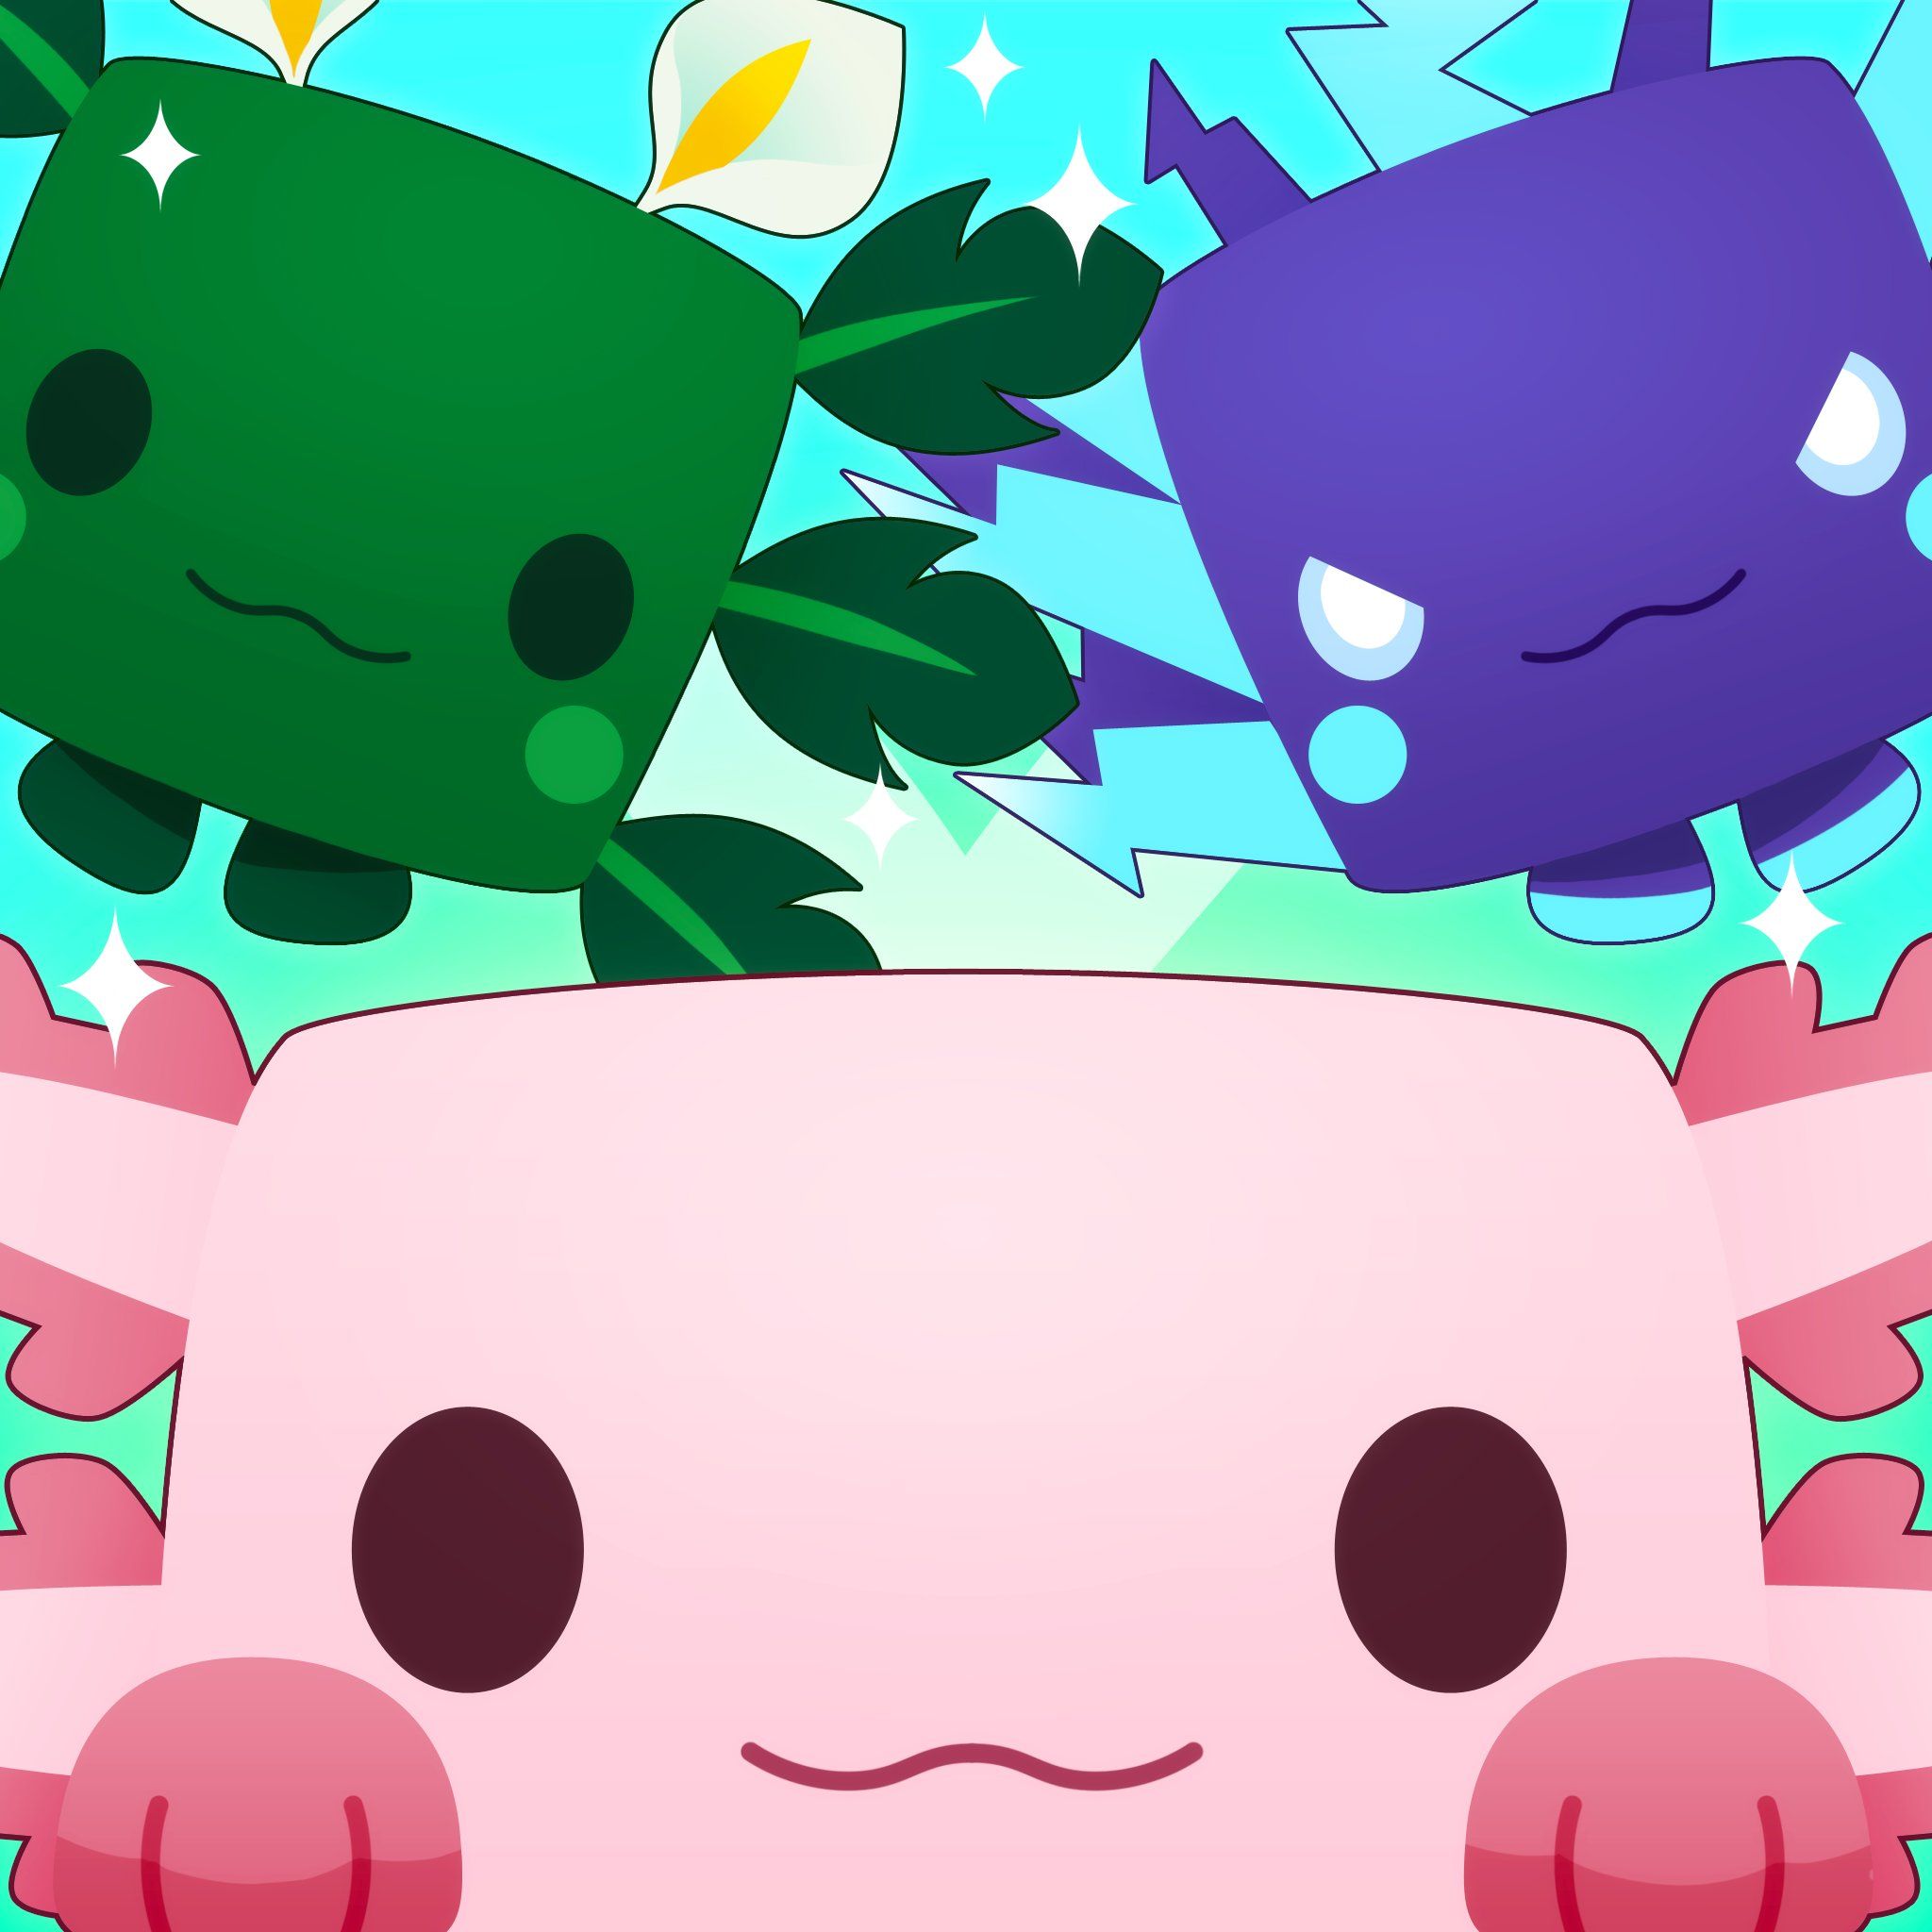 Pet Simulator X Axolotl Update - New Codes & Patch Notes February 2022